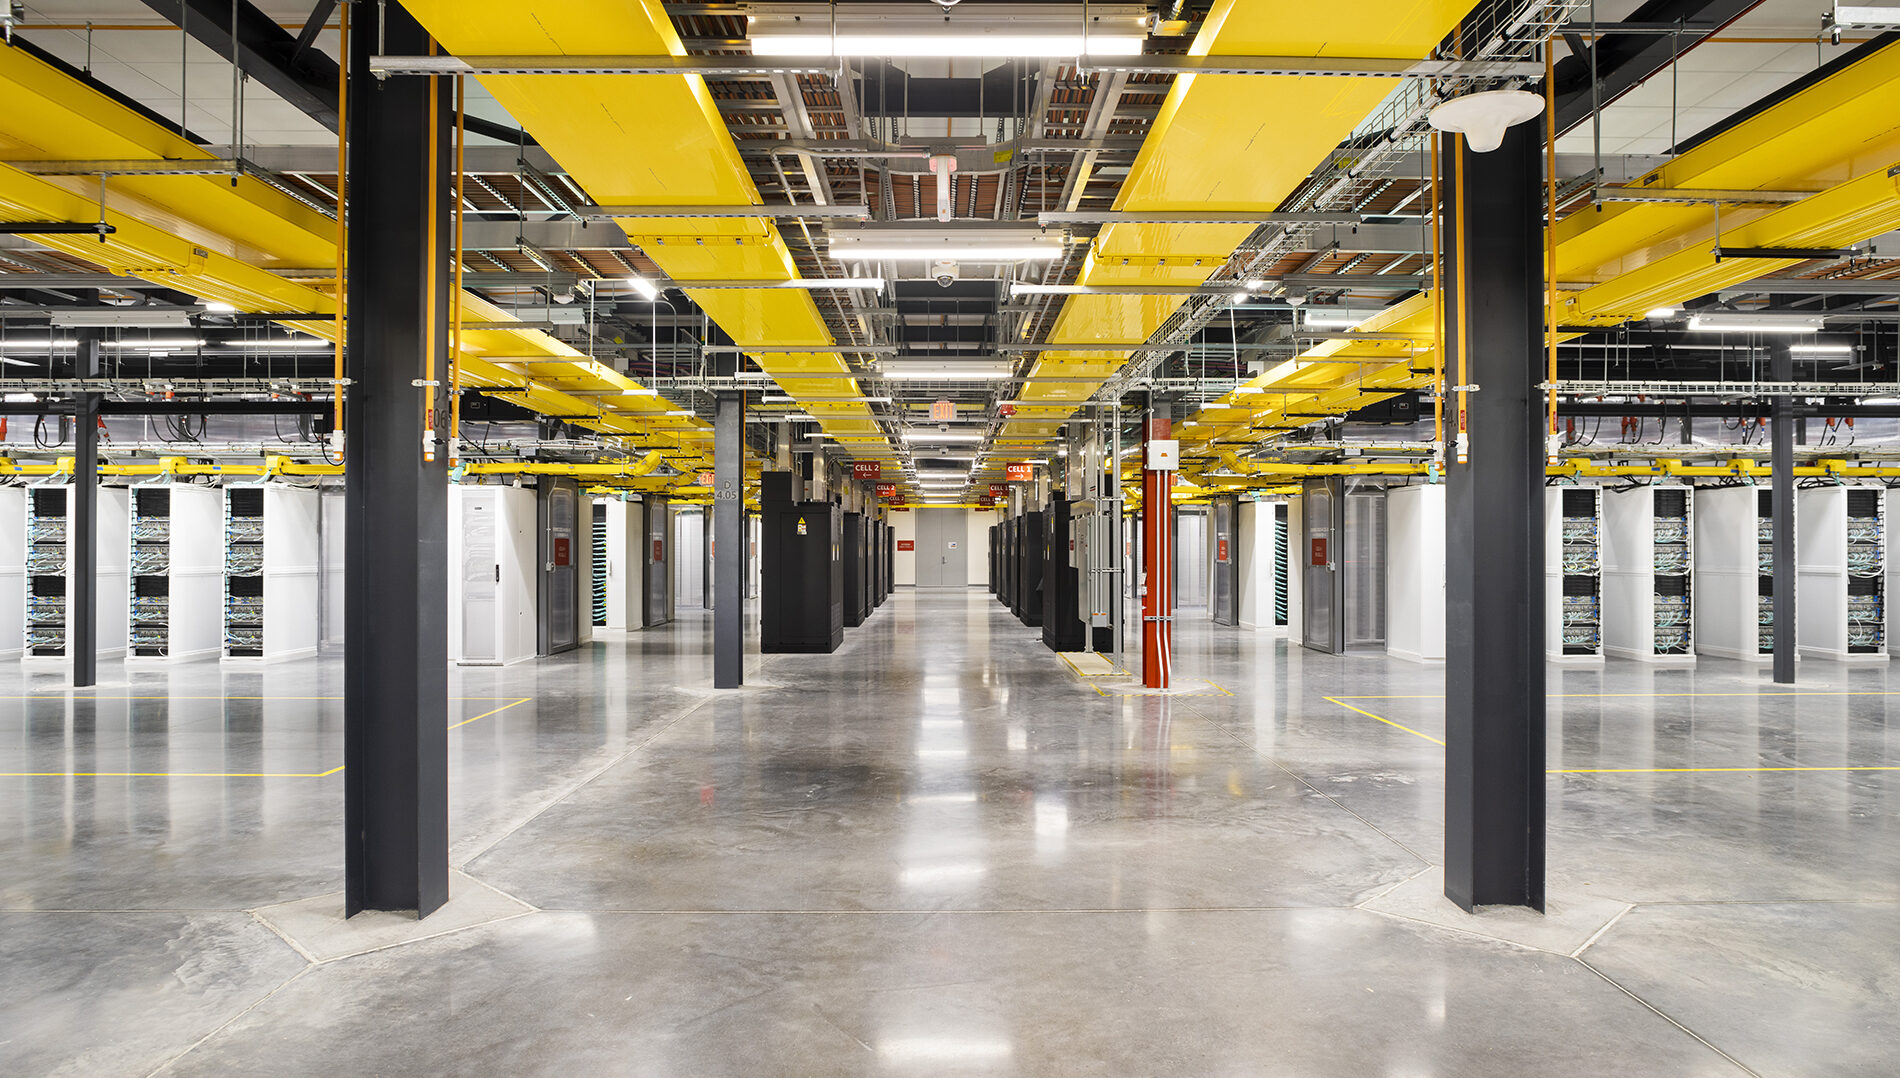 Interior of a modern data center with rows of servers and yellow columns under bright lighting.